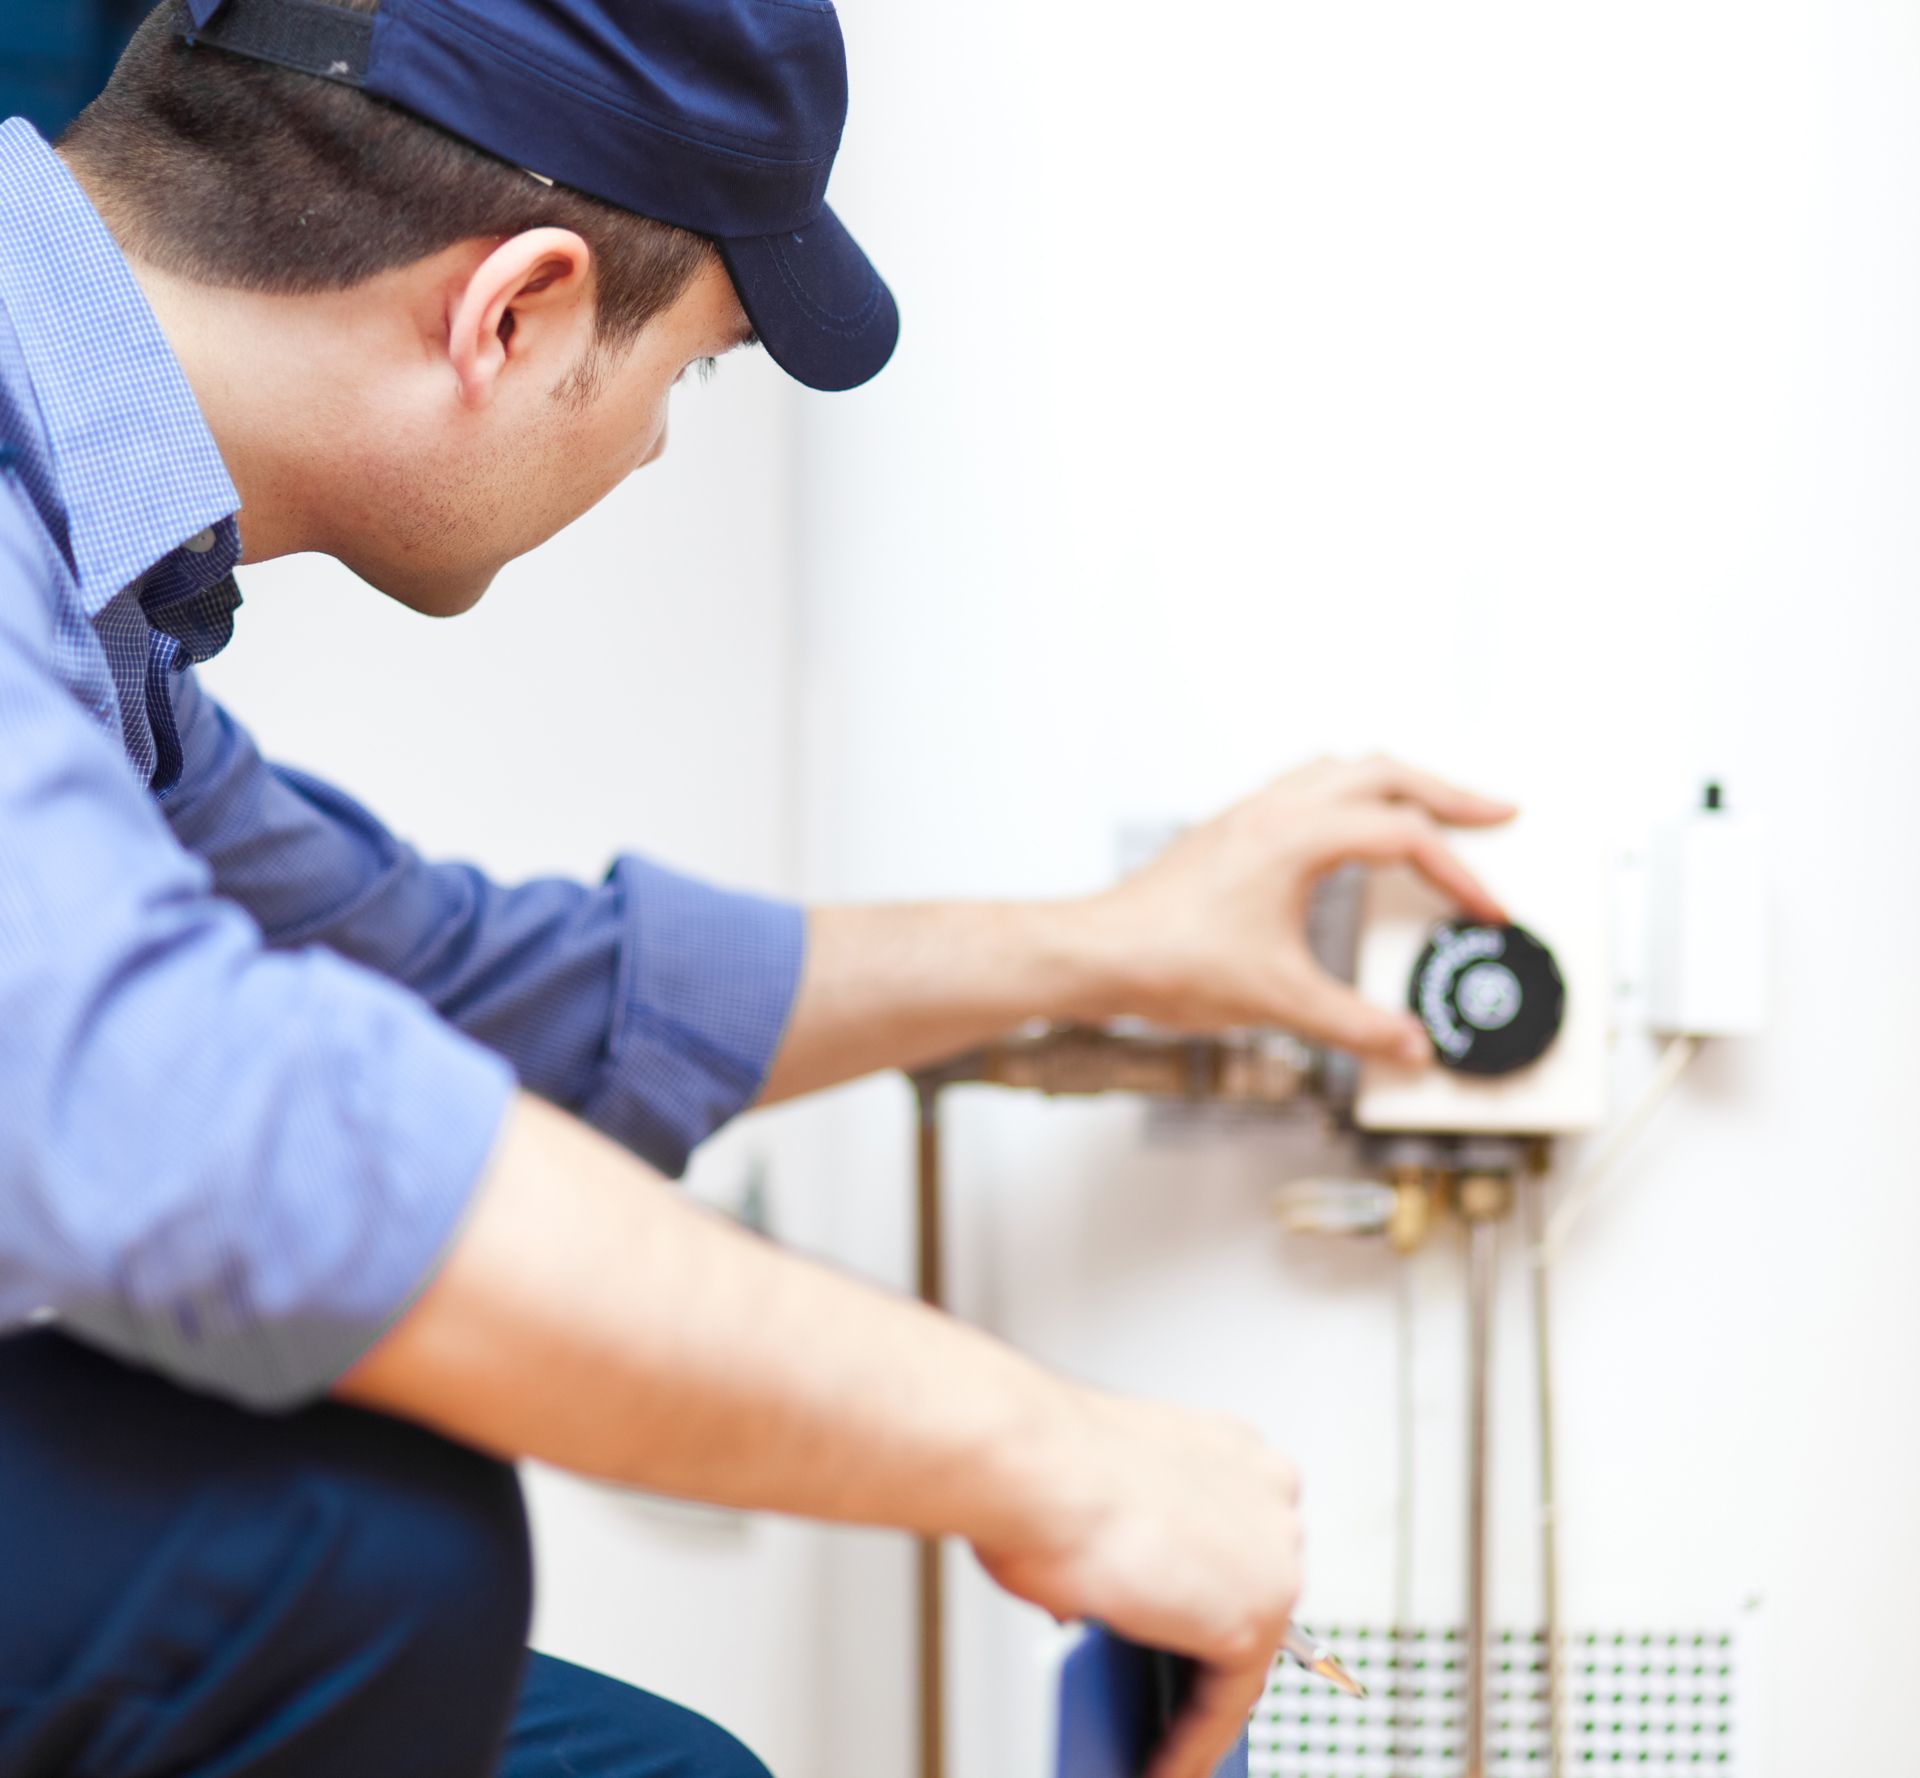 A man wearing a hat is working on a water heater